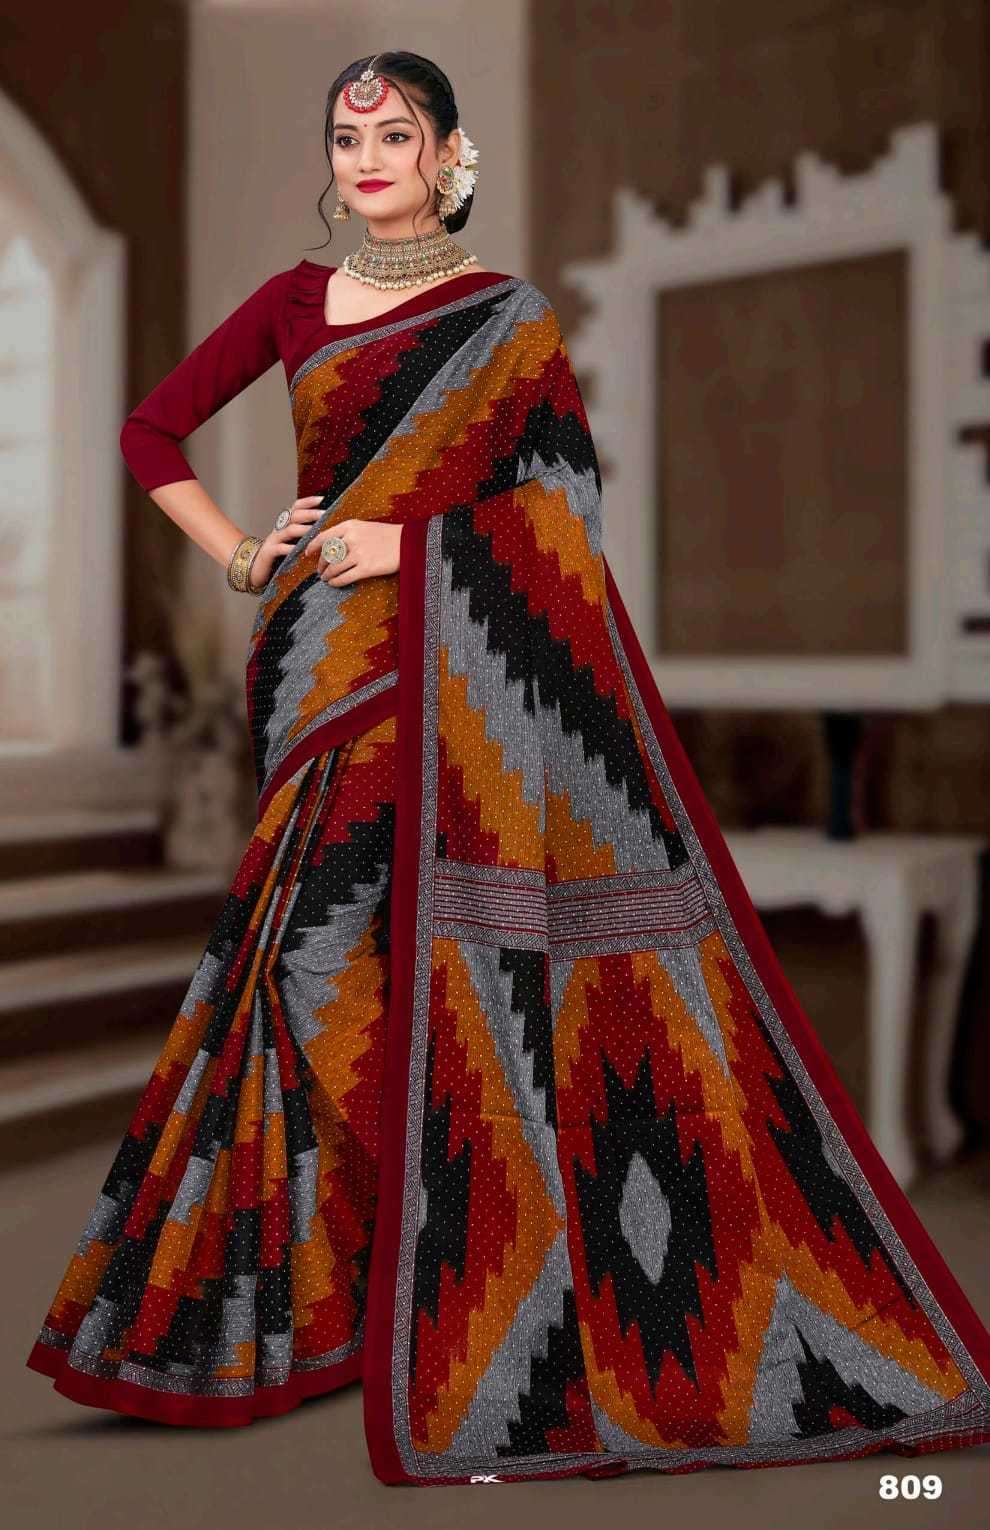 MAMA MASLEEN VOL-6 SERIES 801 TO 810 SAREE BY BALAJI COTTON DESIGNER DIGITAL PRINTED COTTON SAREES ARE AVAILABLE AT WHOLESALE PRICE